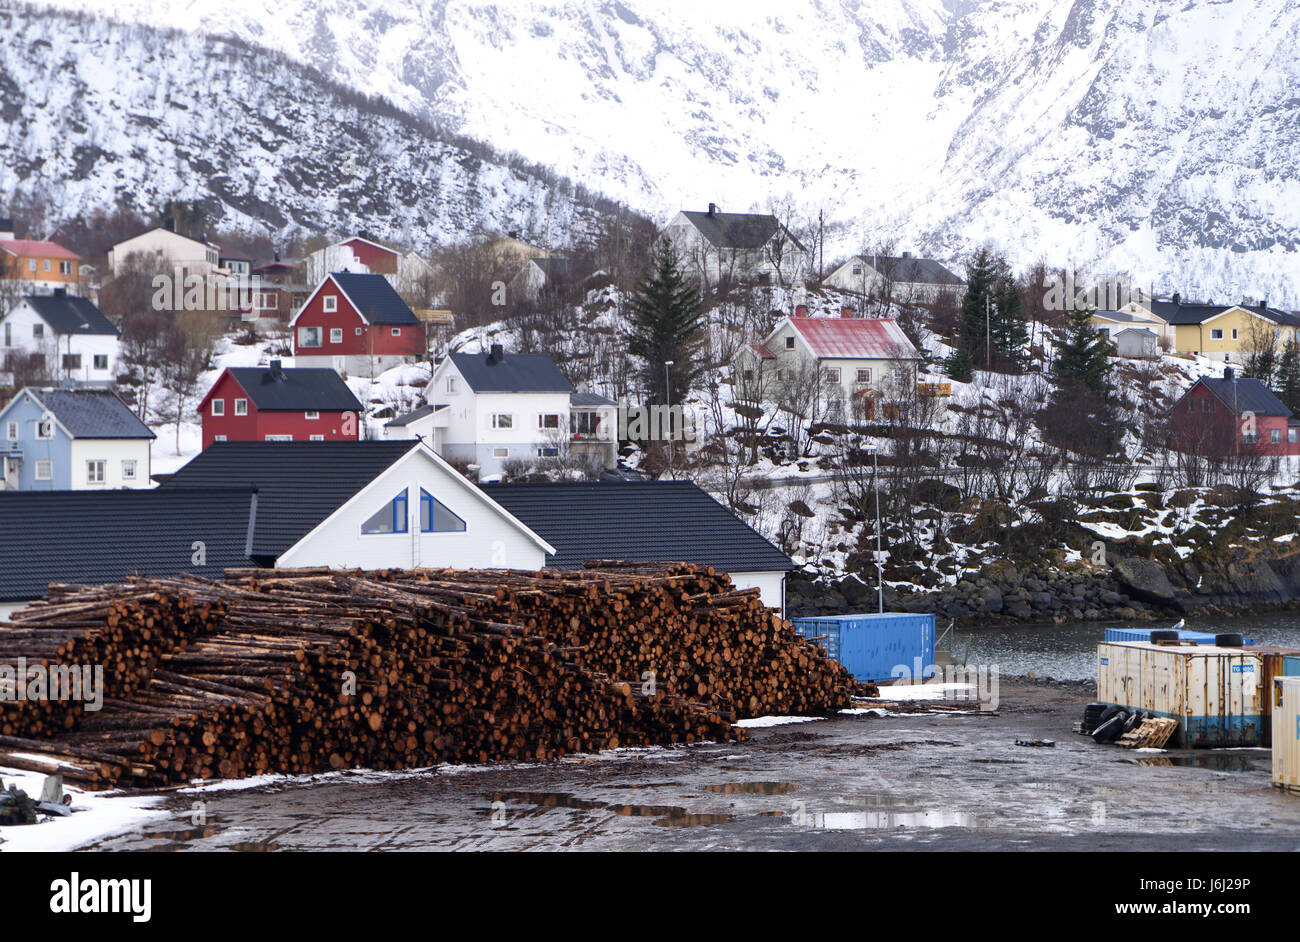 Timber stacked on the quay at Stokmarknes.  Stokmarknes, Nordland, Norway. Stock Photo